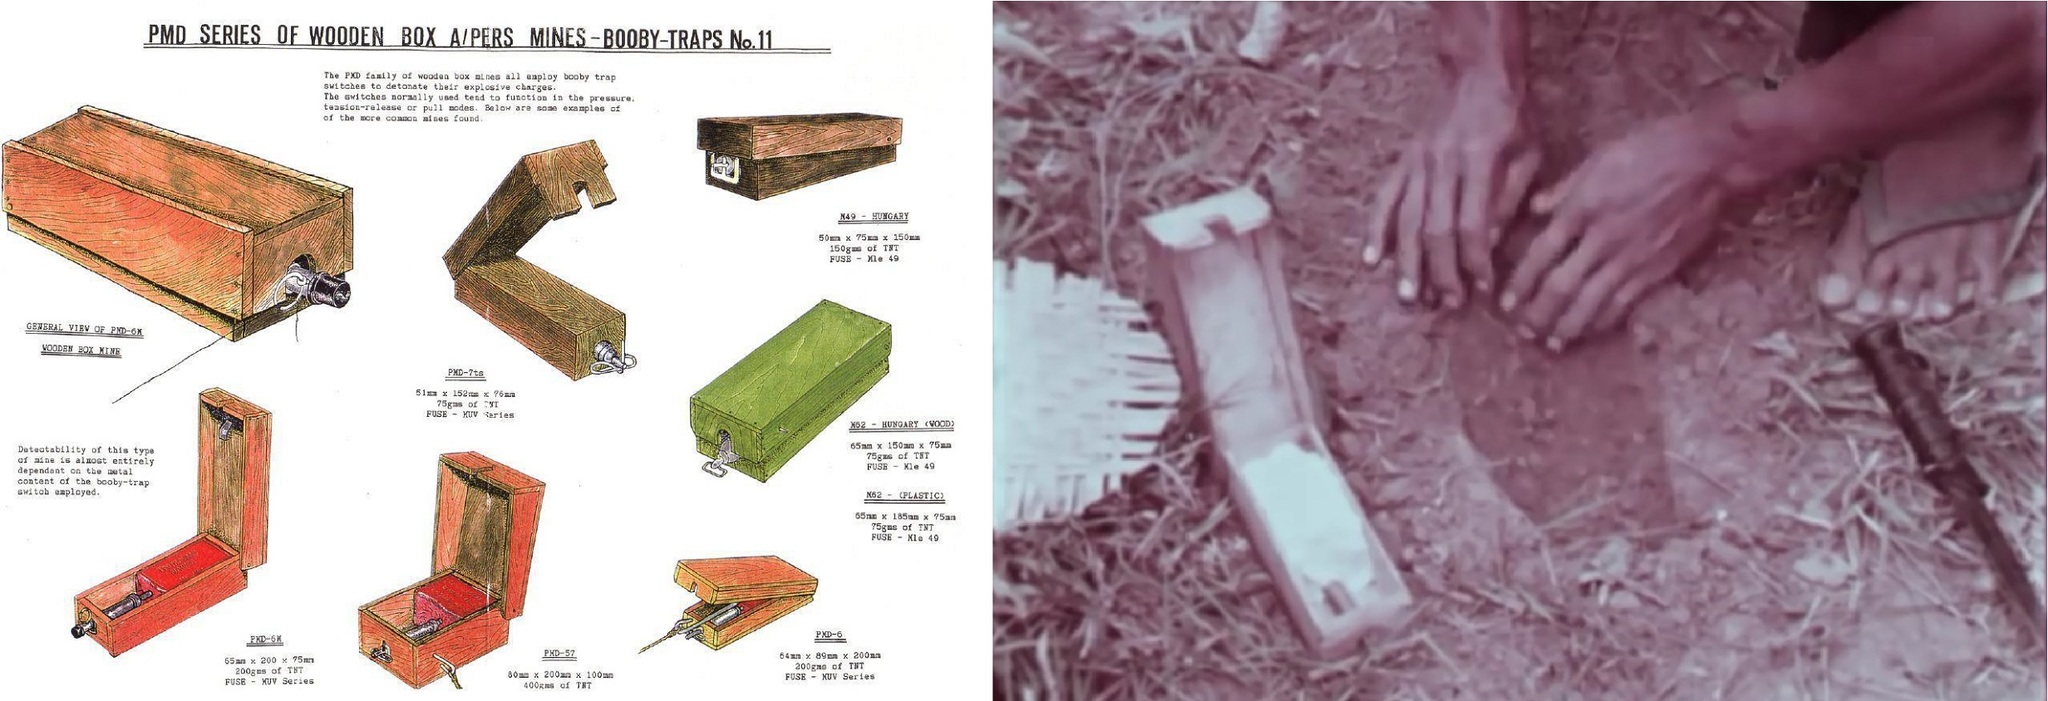 Anti-Personnel Mines, Improvised Explosive Devices and Viet Cong Traps (Part I) - Weapon, Mines, Vietcong, Analysis, Military history, Longpost, Vietnam war